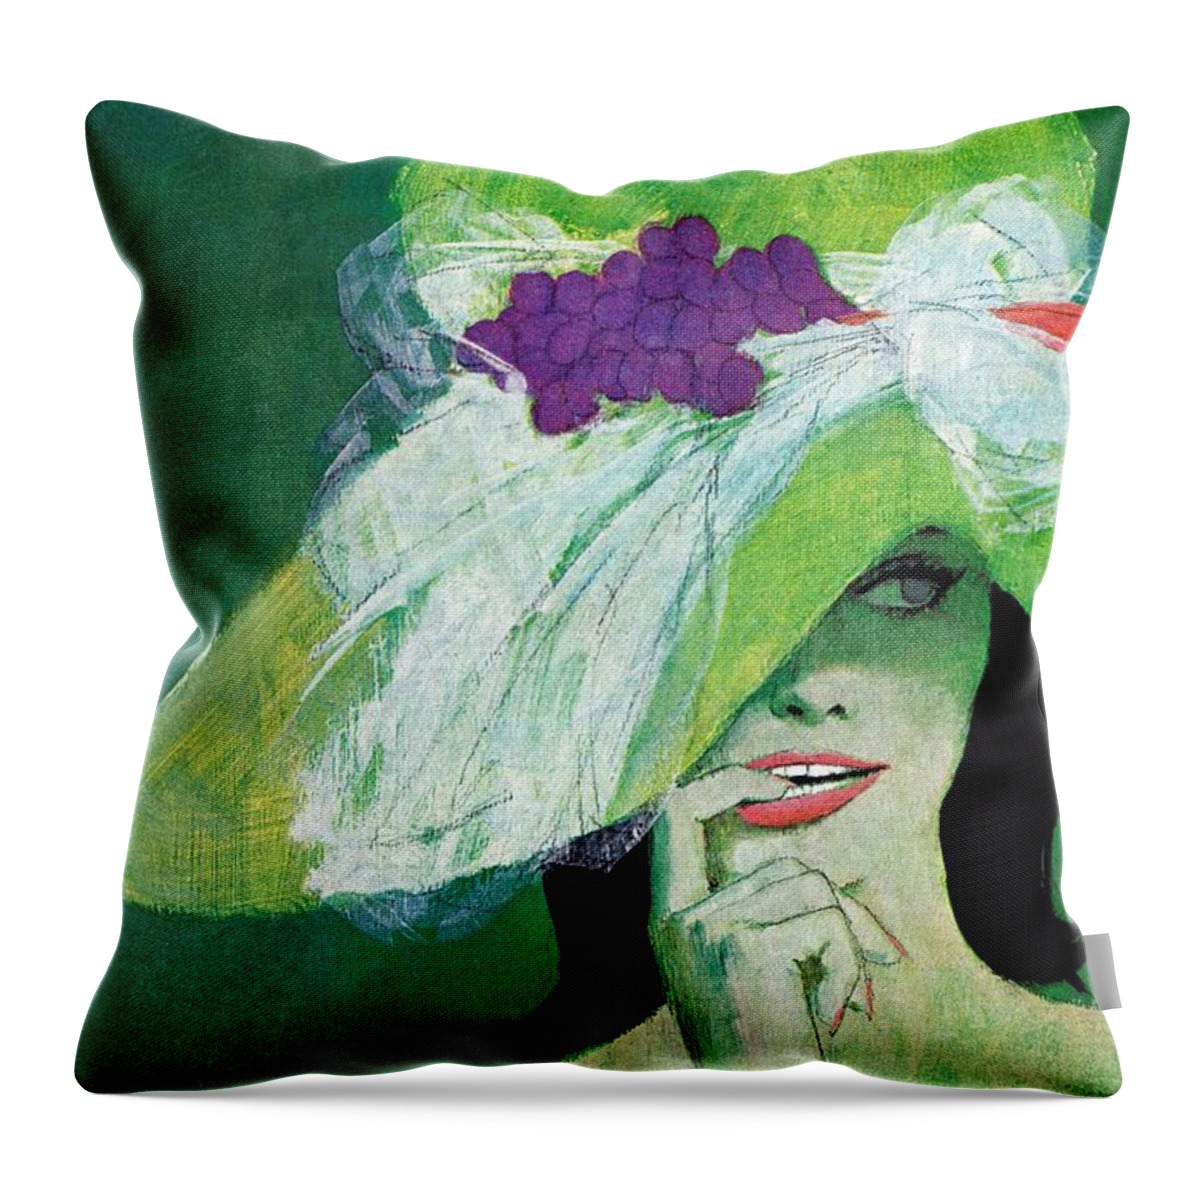 Art Throw Pillow featuring the drawing Woman With Green Hat. by Coby Whitmore